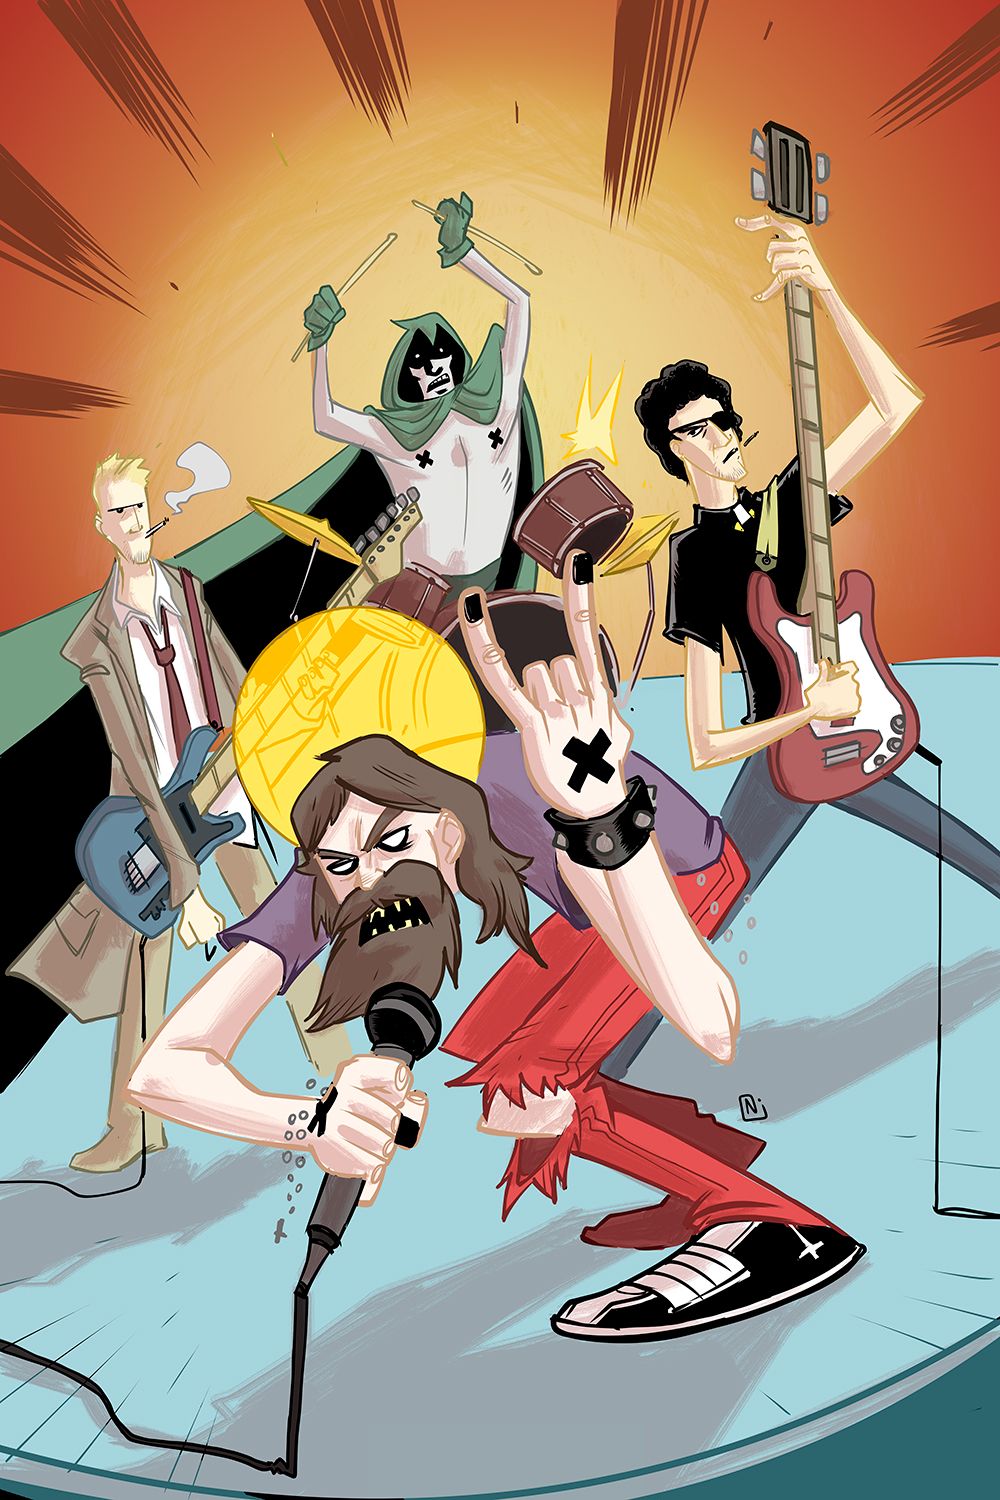 The Line it is Drawn #218 - Superhero Music Groups!